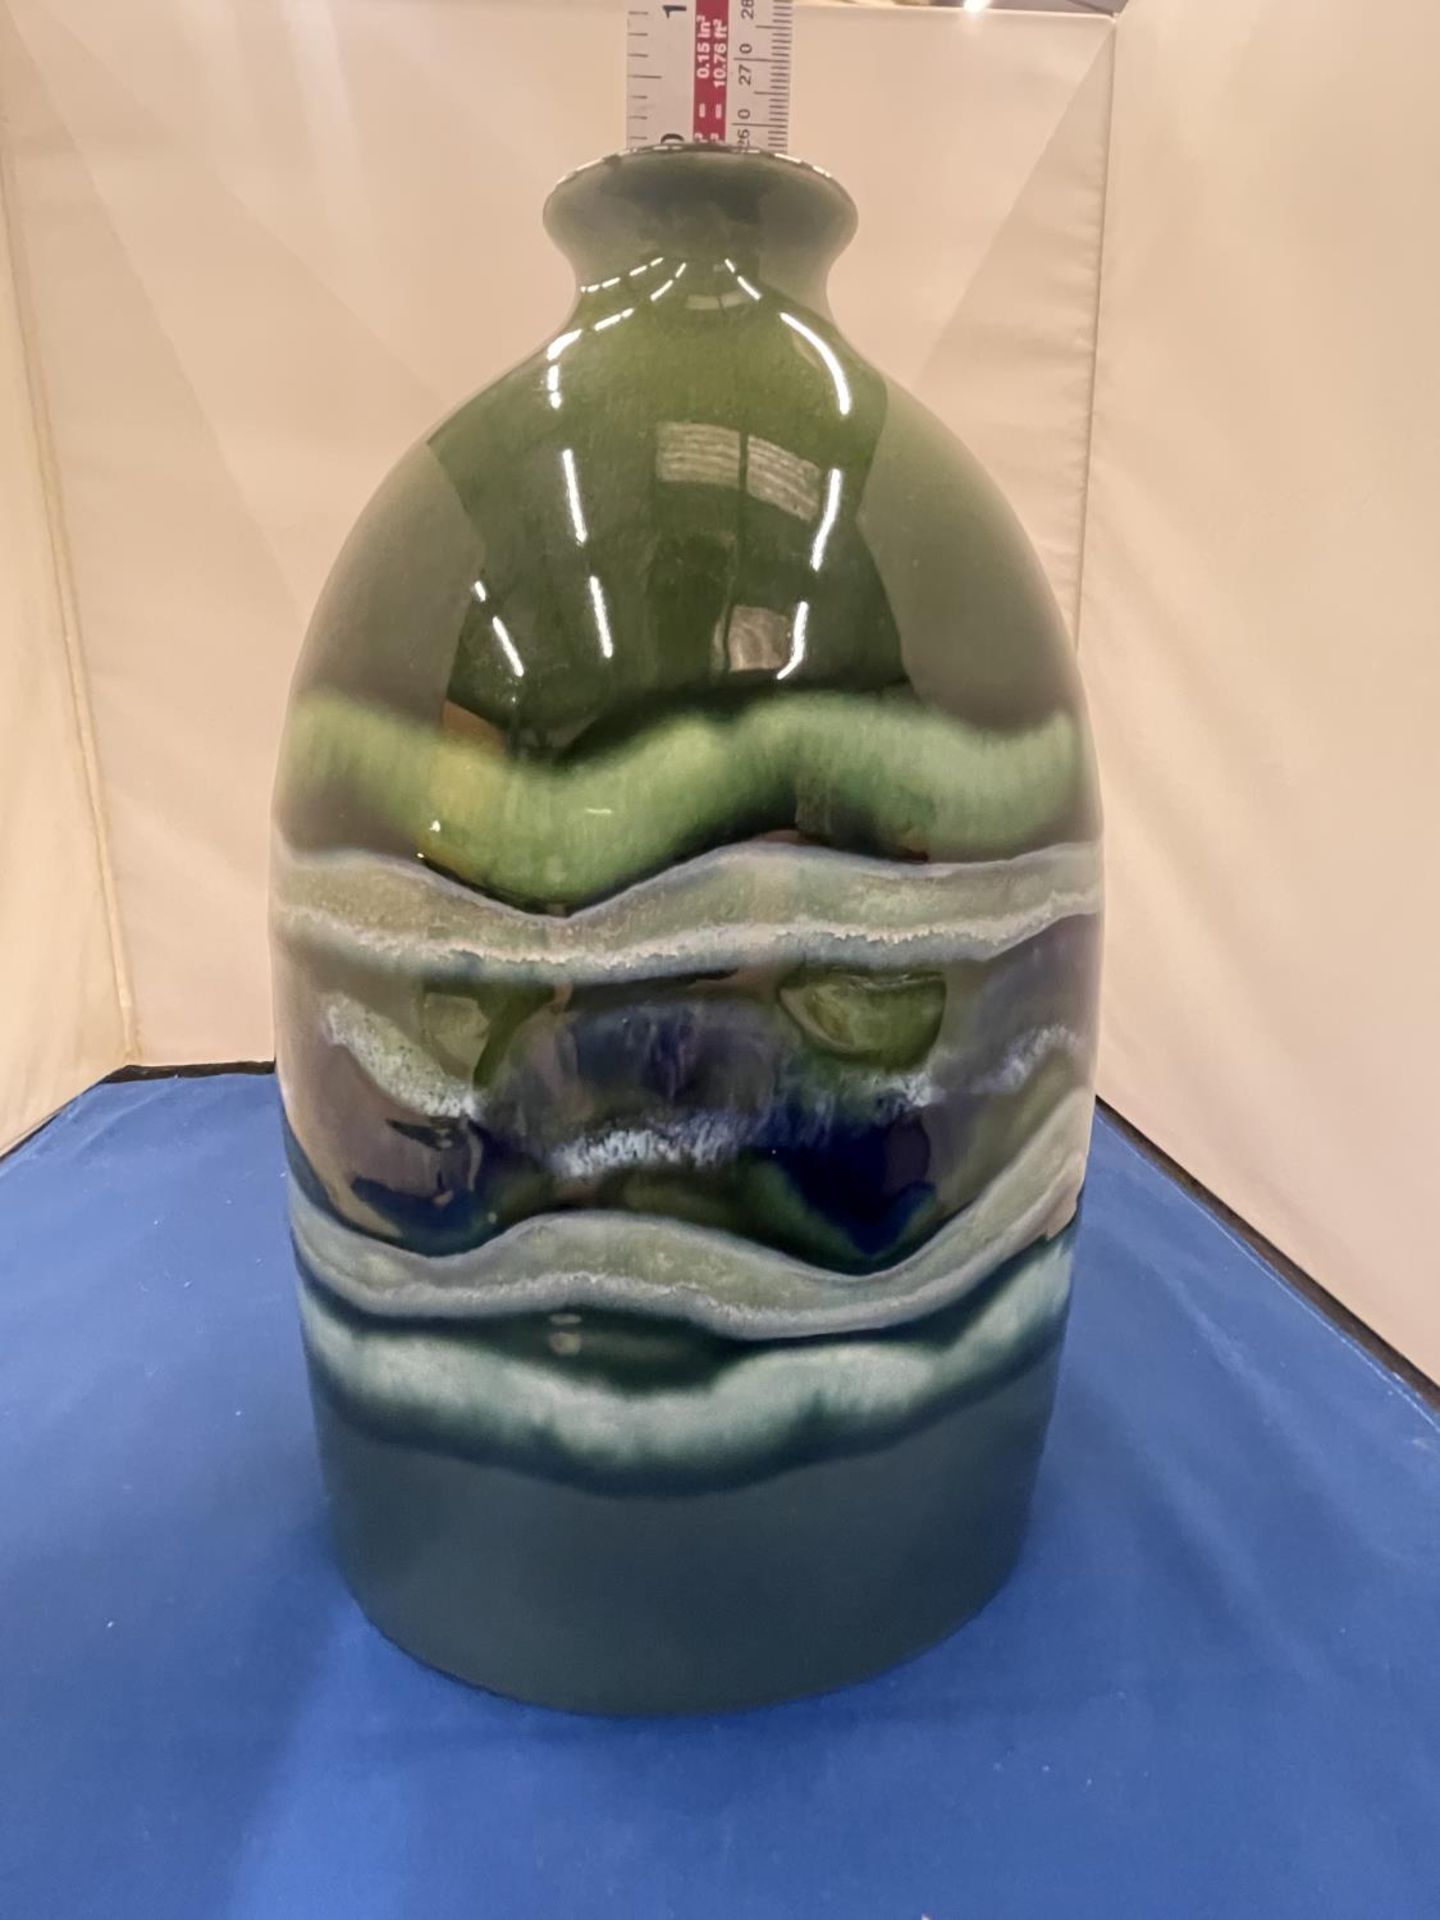 A POOLE POTTERY BOTTLE VASE MAYA DESIGN WITH ORIGINAL BOX 23CM TALL - Image 12 of 12